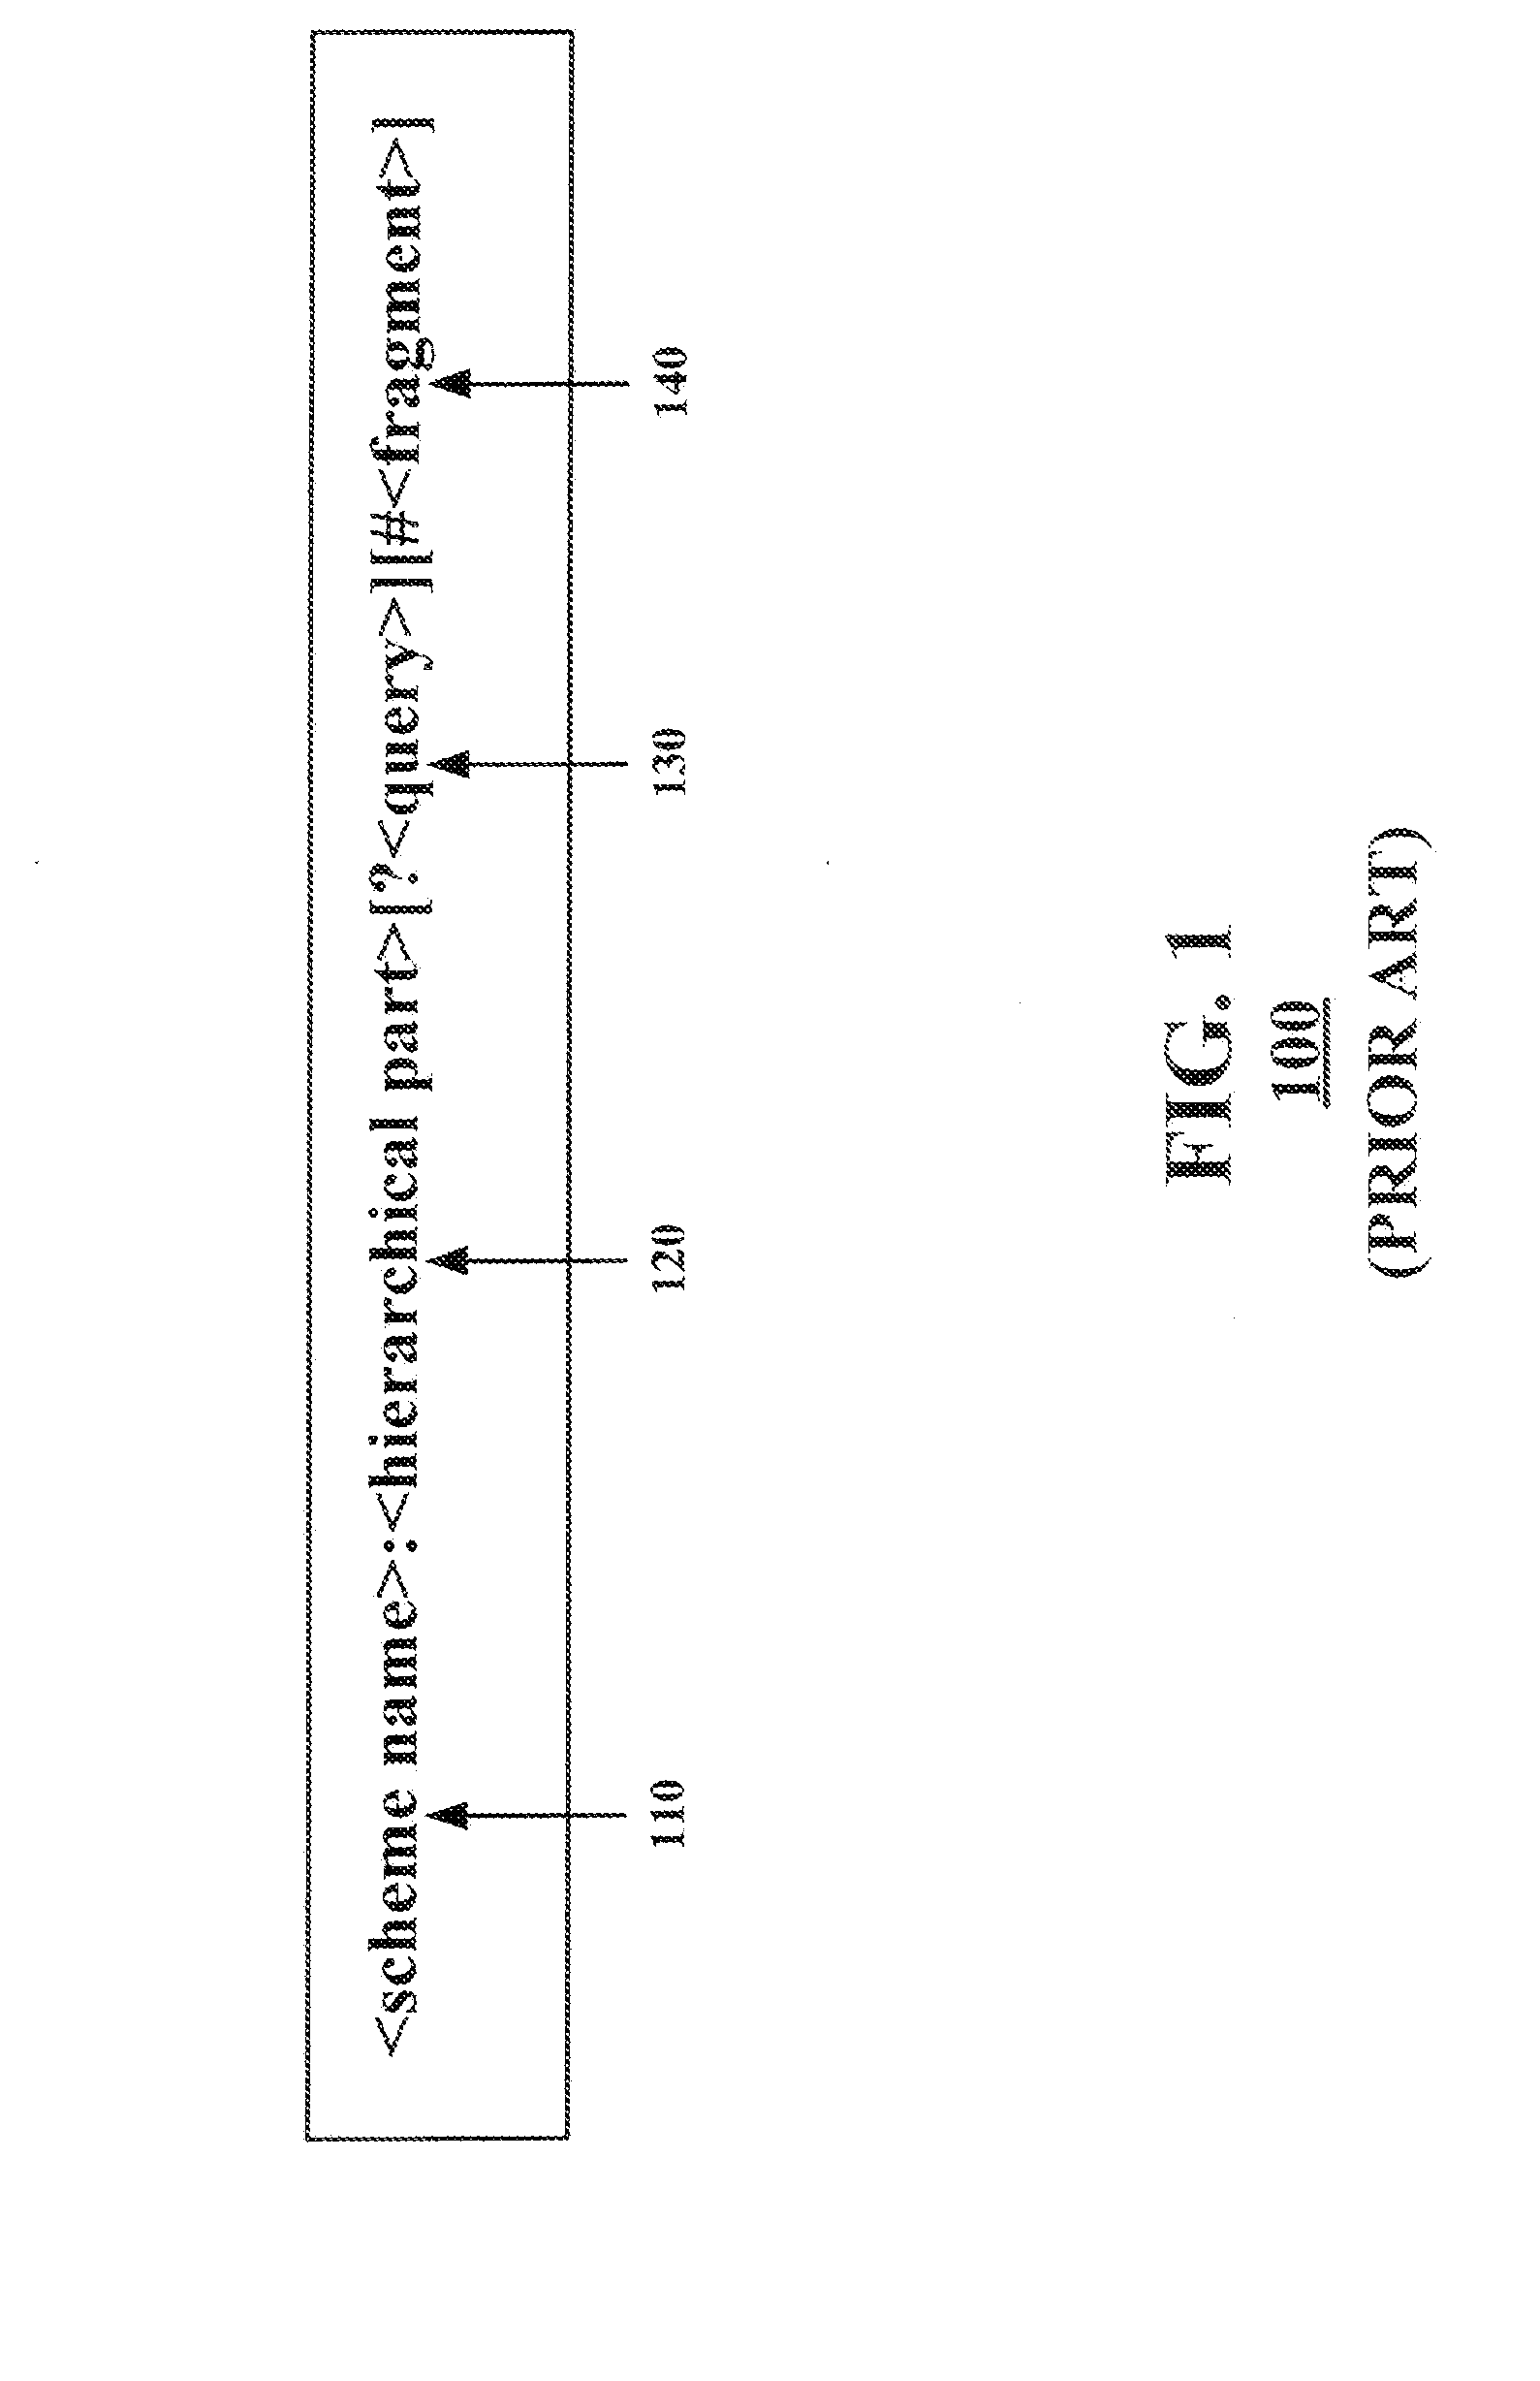 Draggable mechanism for identifying and communicating the state of an application